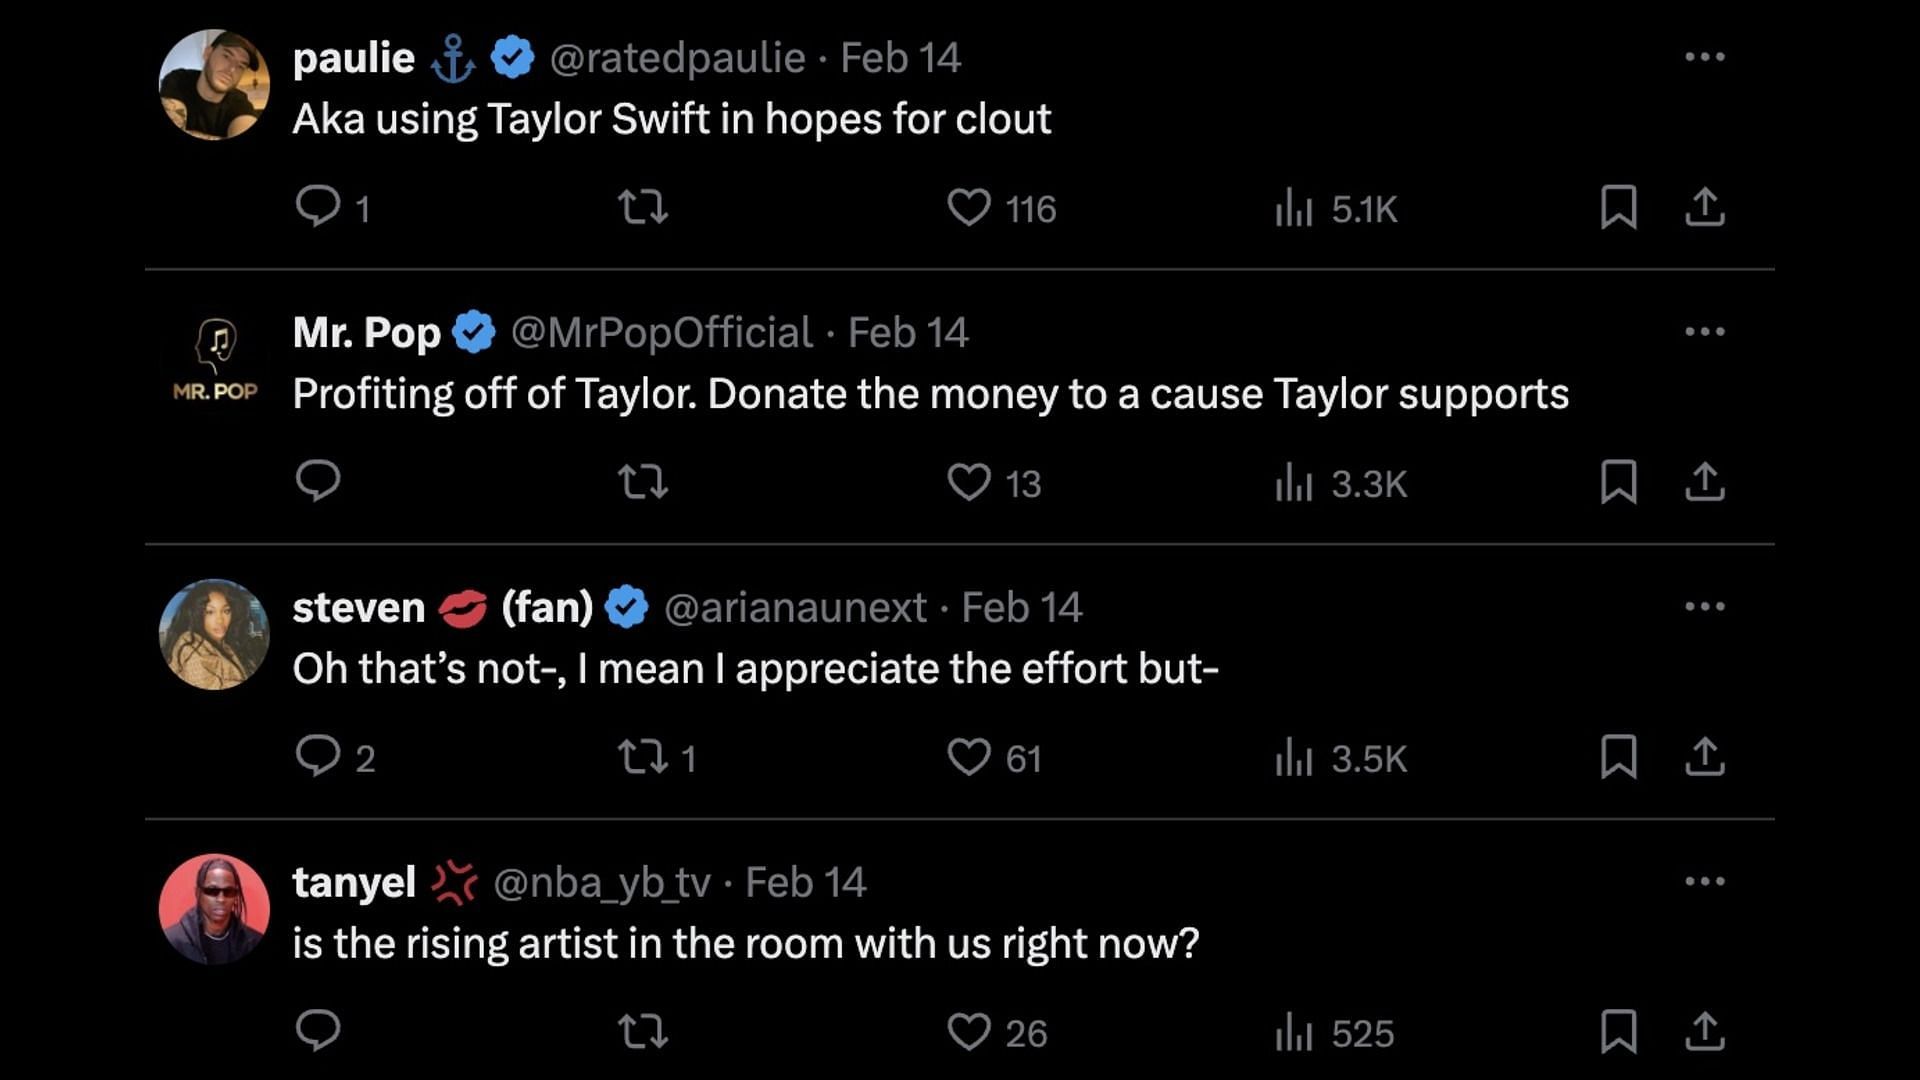 Fans say the singer used Taylor for clout. (Image via X/@PopCrave)